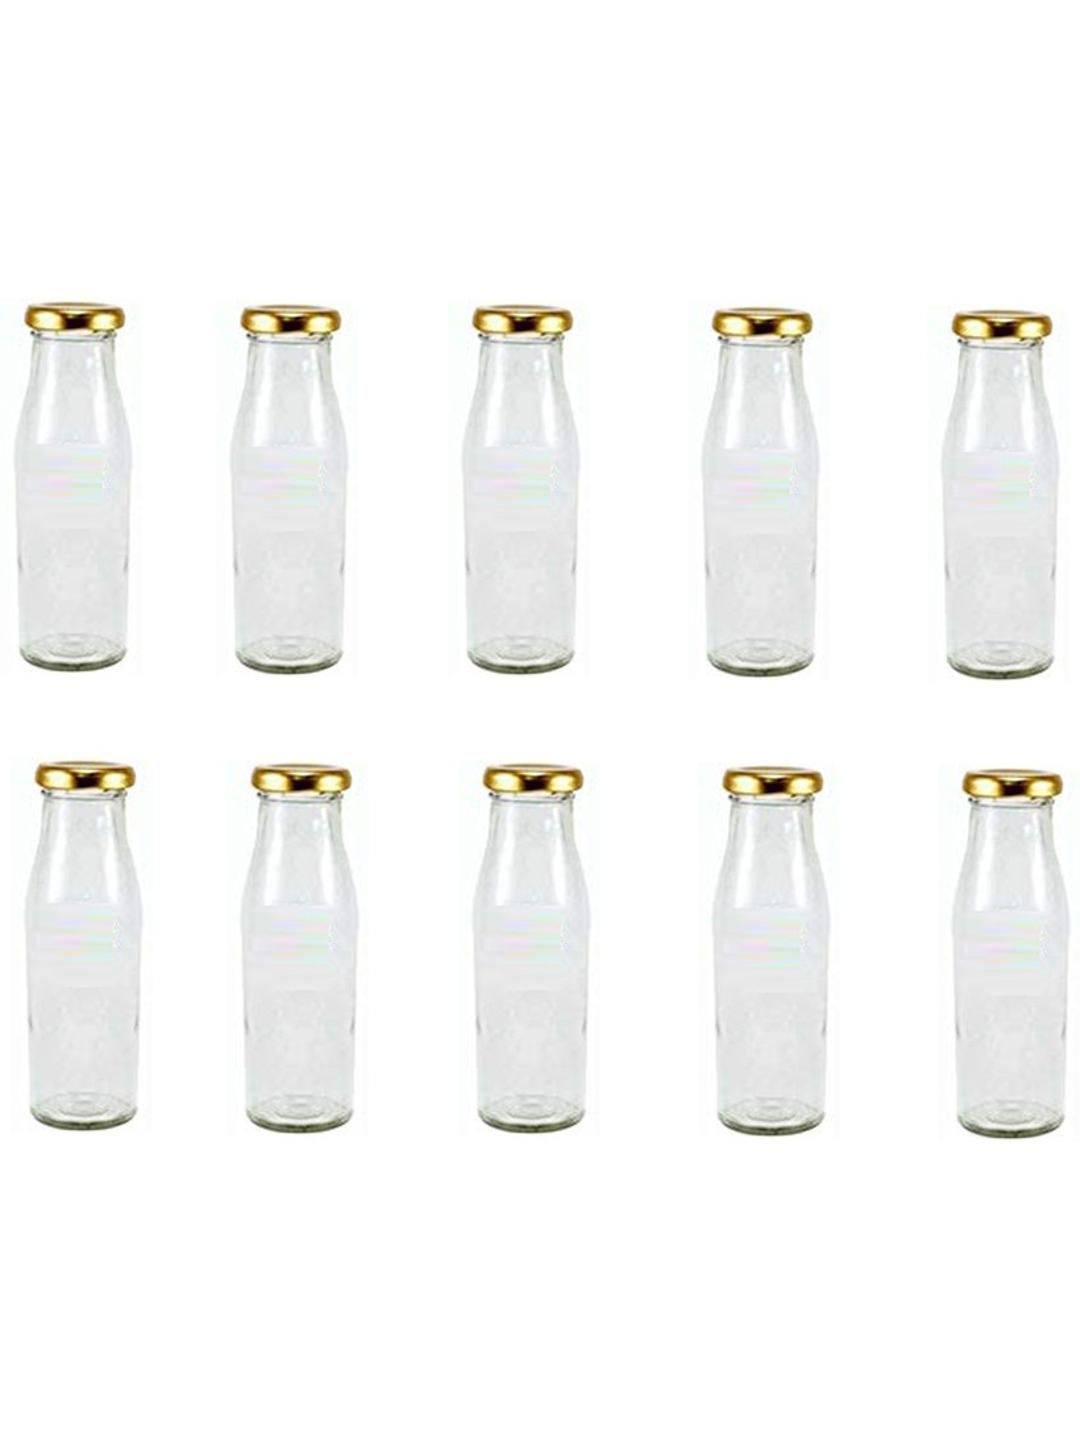     			AFAST Multipurpose Bottle Glass Transparent Utility Container ( Set of 10 )